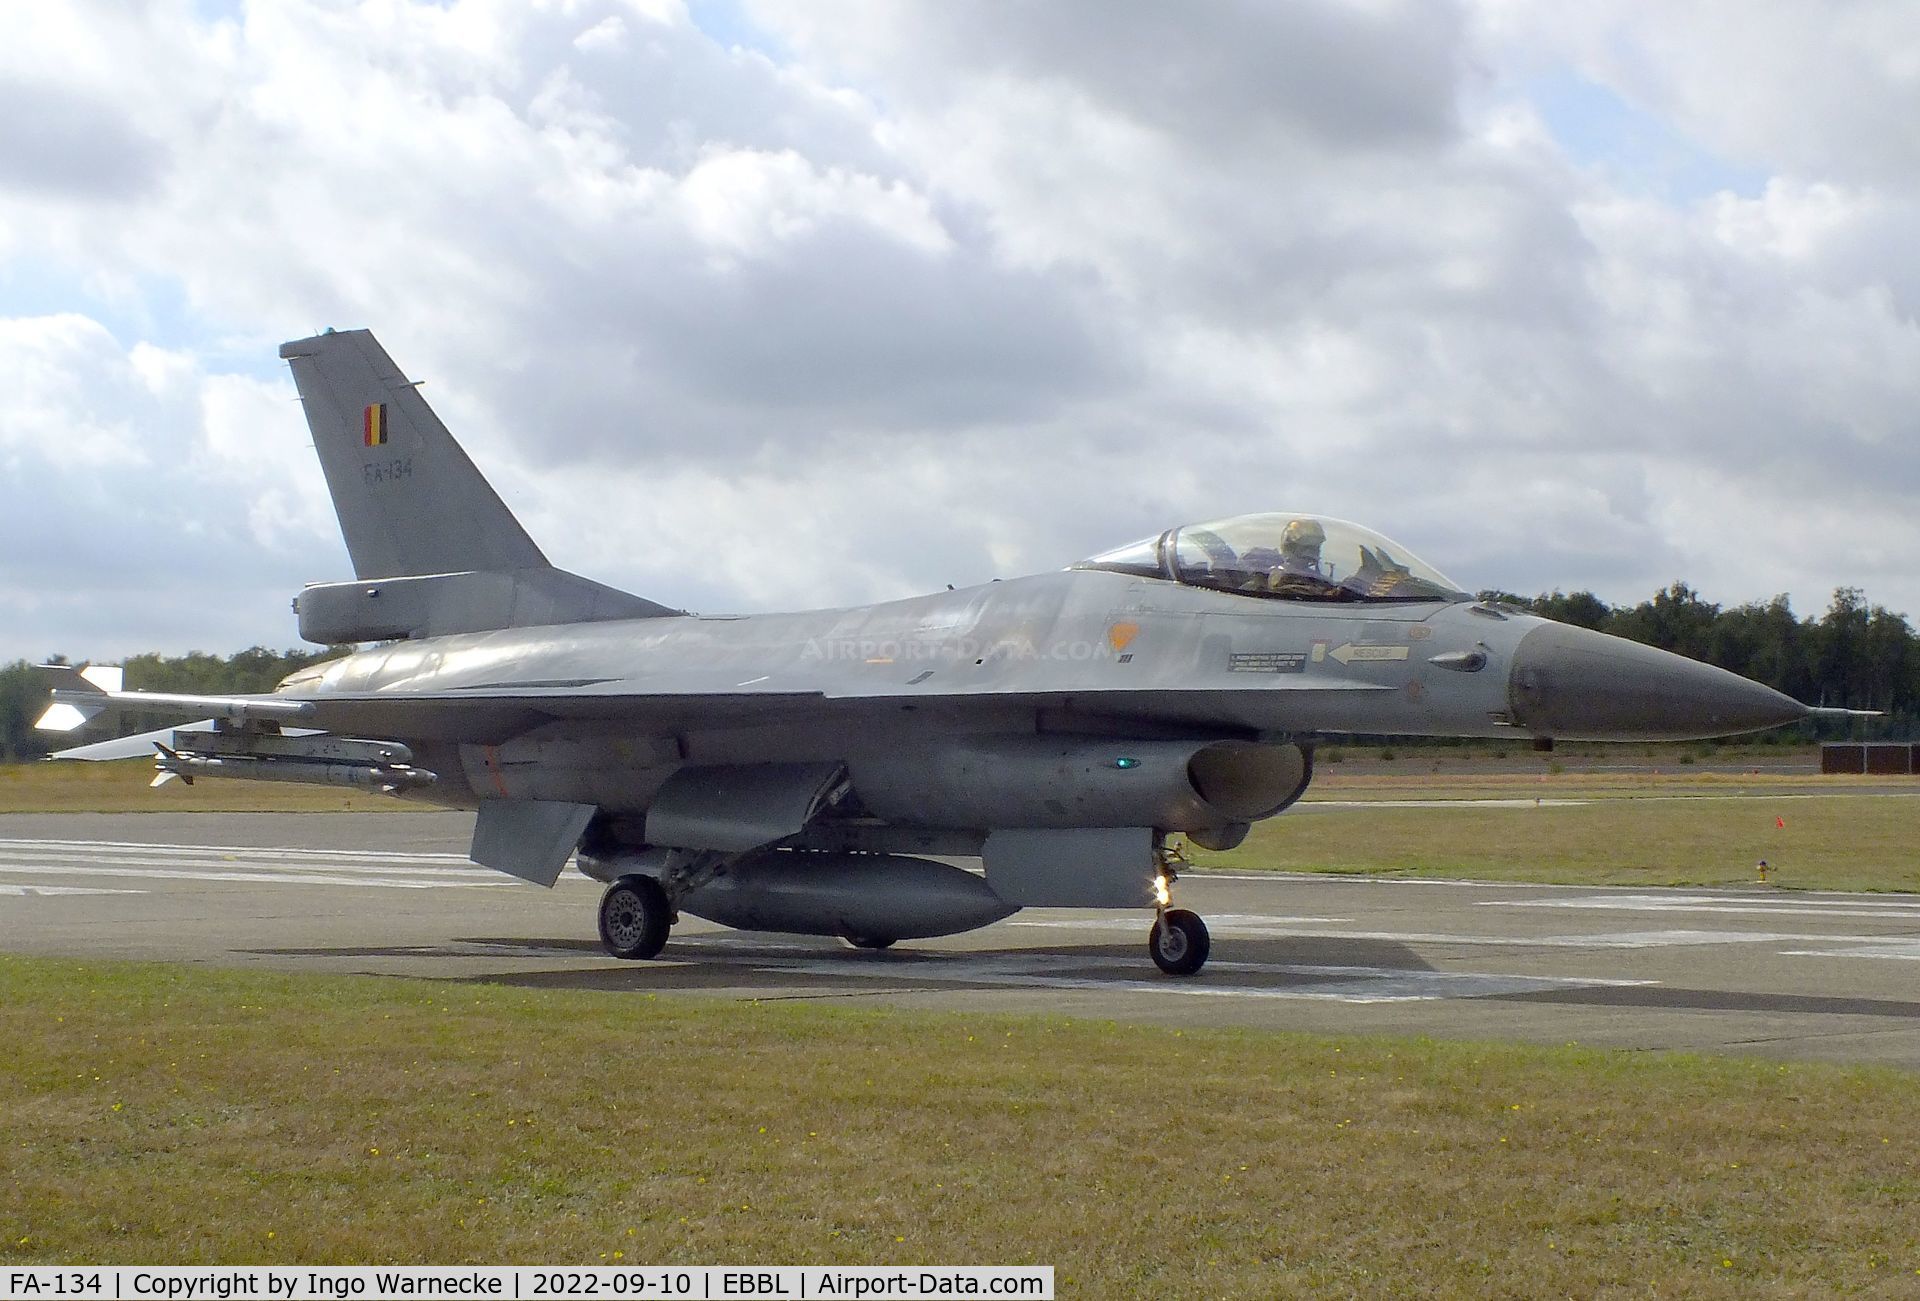 FA-134, SABCA F-16AM Fighting Falcon C/N 6H-134, General Dynamics (SABCA) F-16AM Fighting Falcon of the FAeB (Belgian air force) at the 2022 Sanicole Spottersday at Kleine Brogel air base